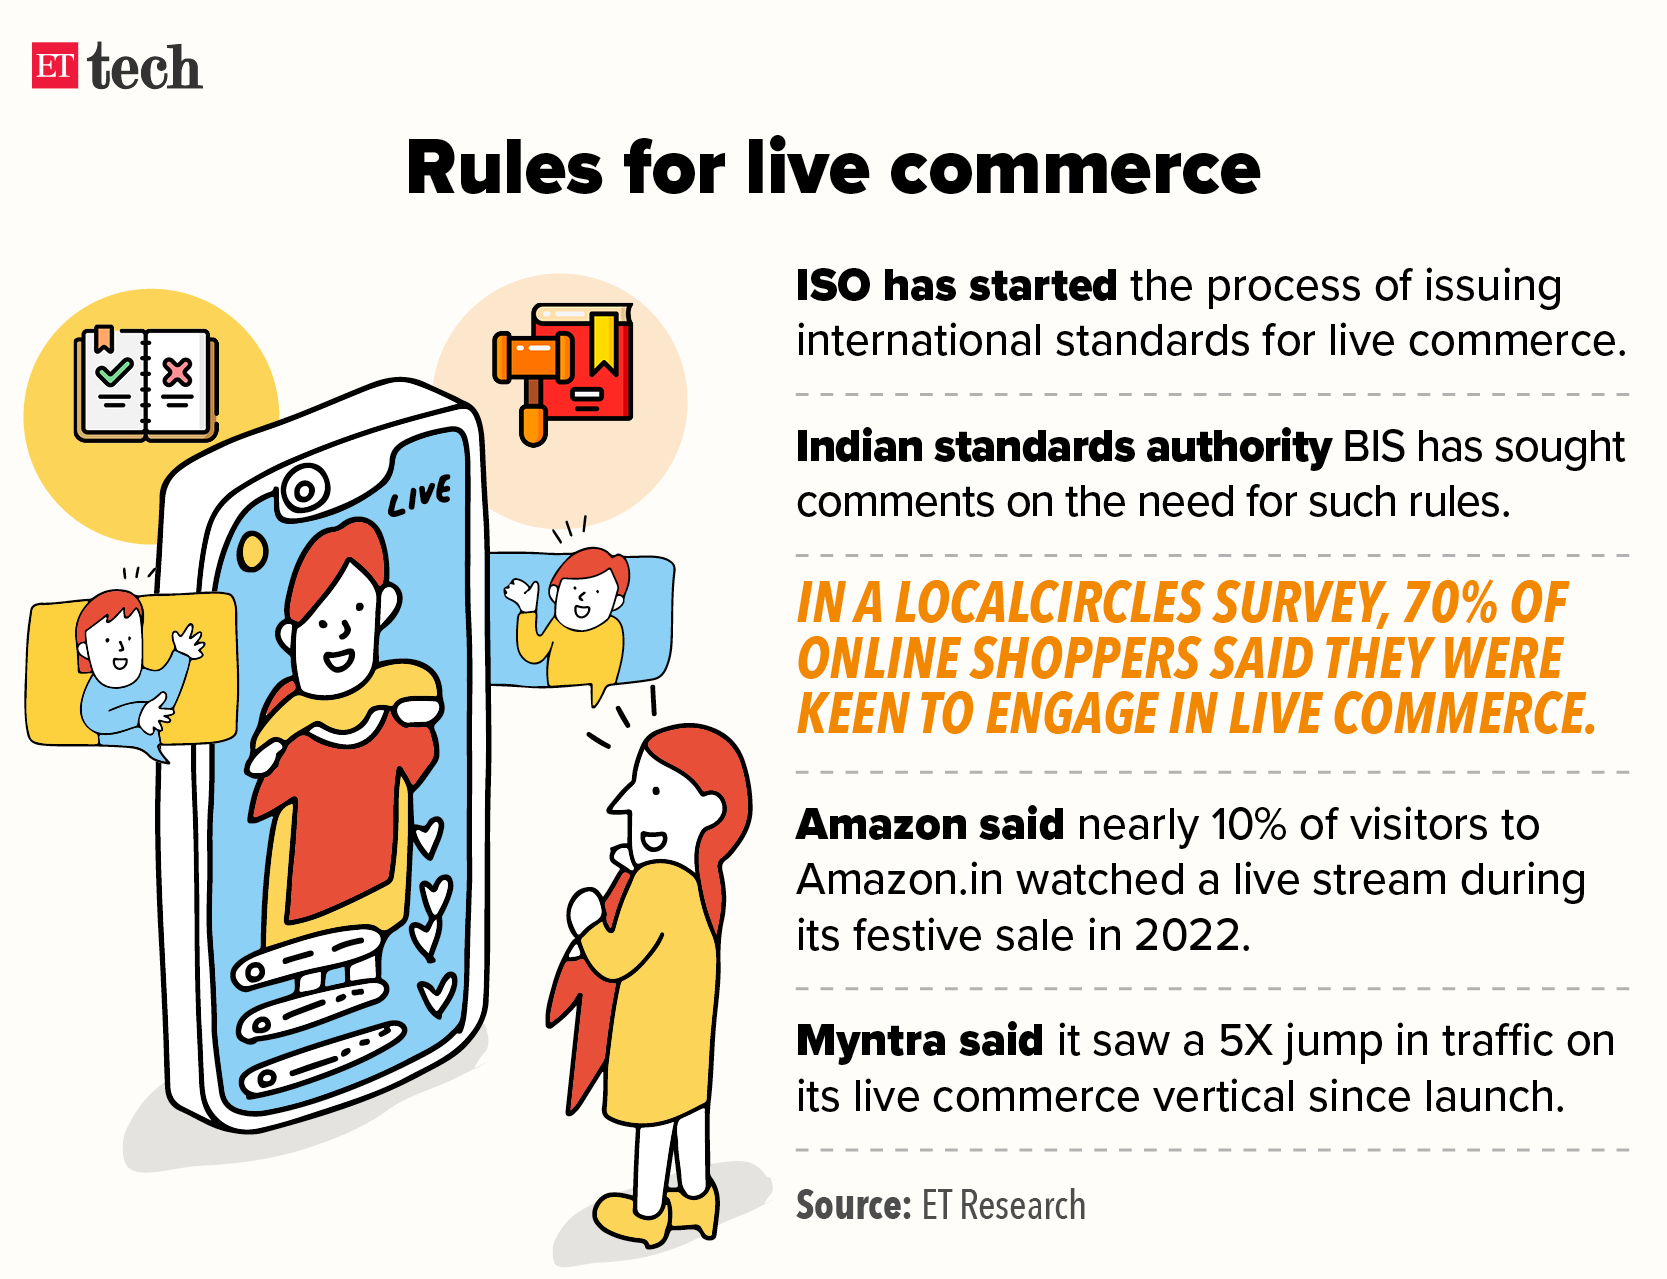 Rules for live commerce